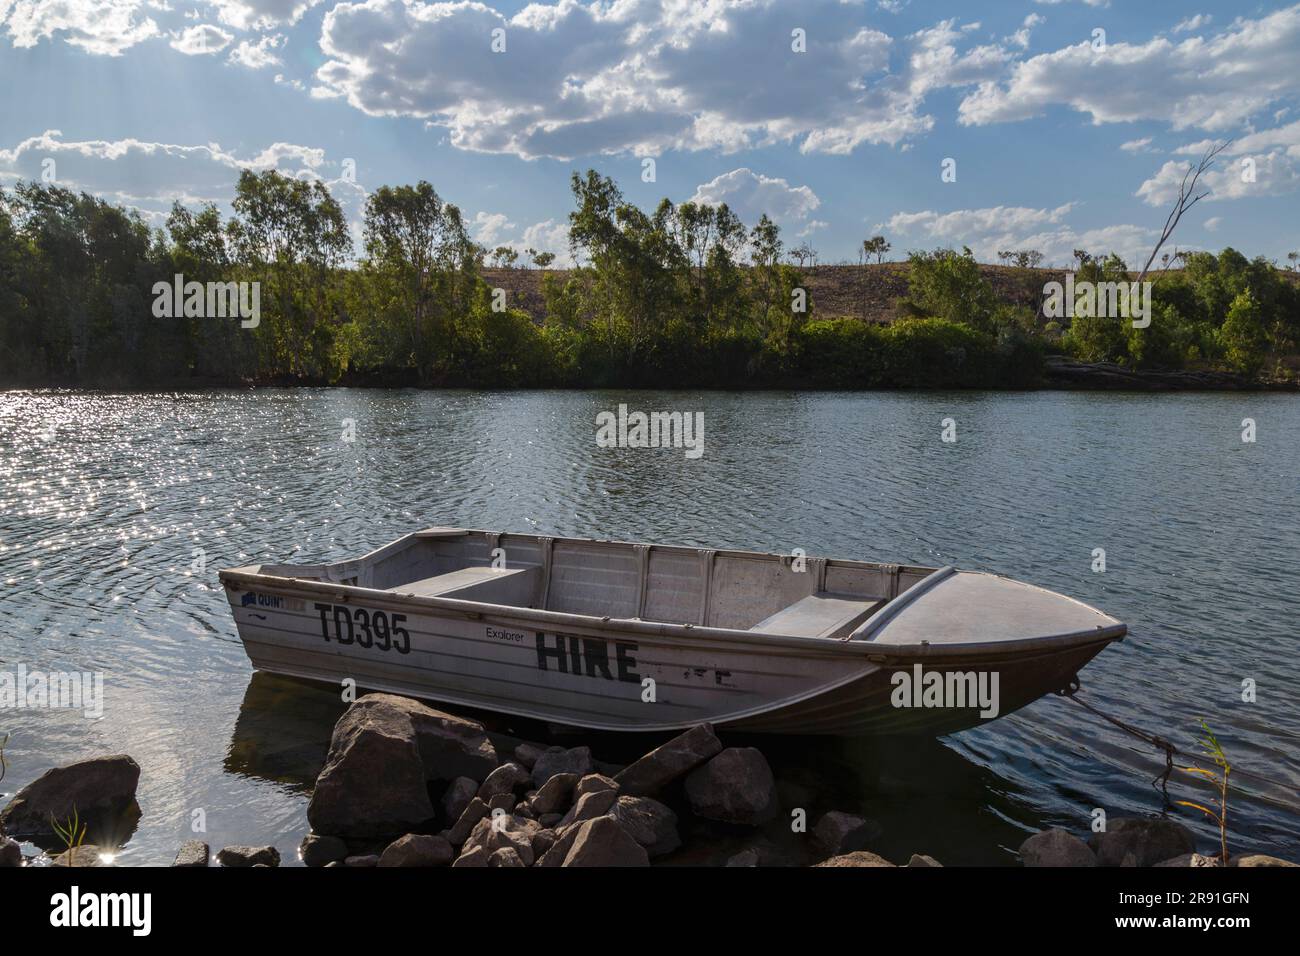 A small tin boat is moored at the side of the Chamberlain River in Western Australia Stock Photo